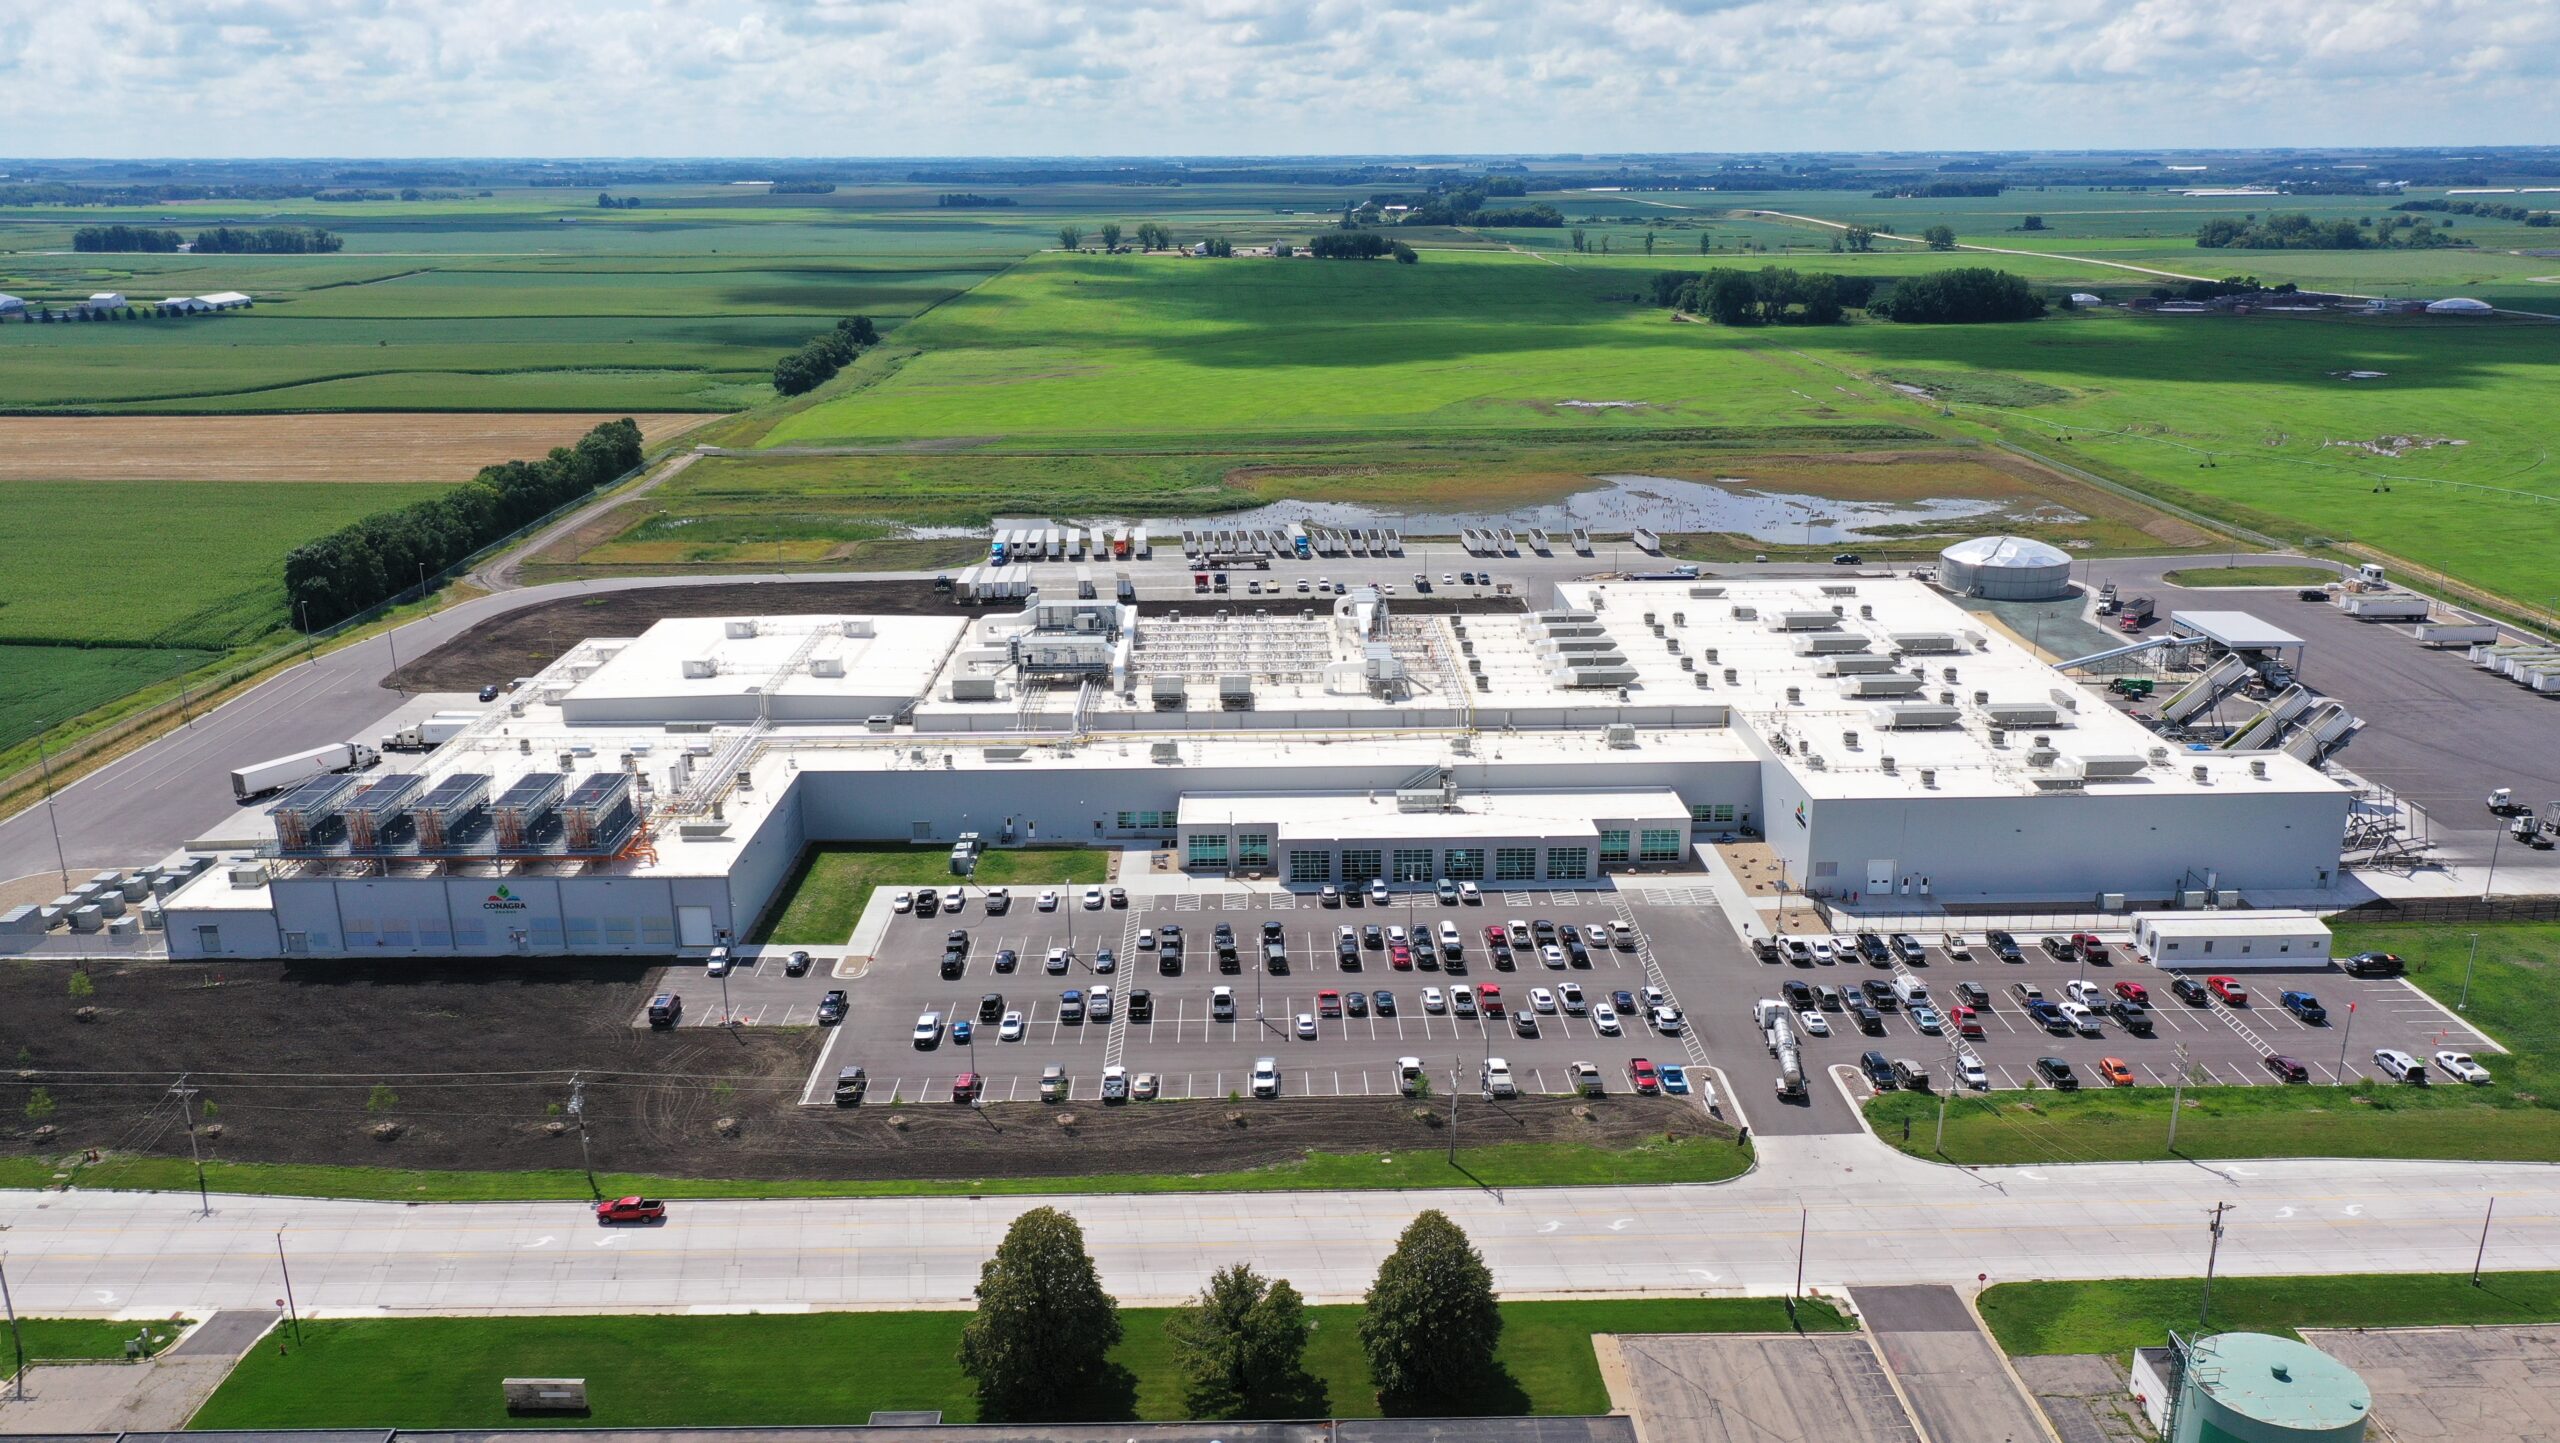 Overview perspective of Conagra Brands vegetable processing plant